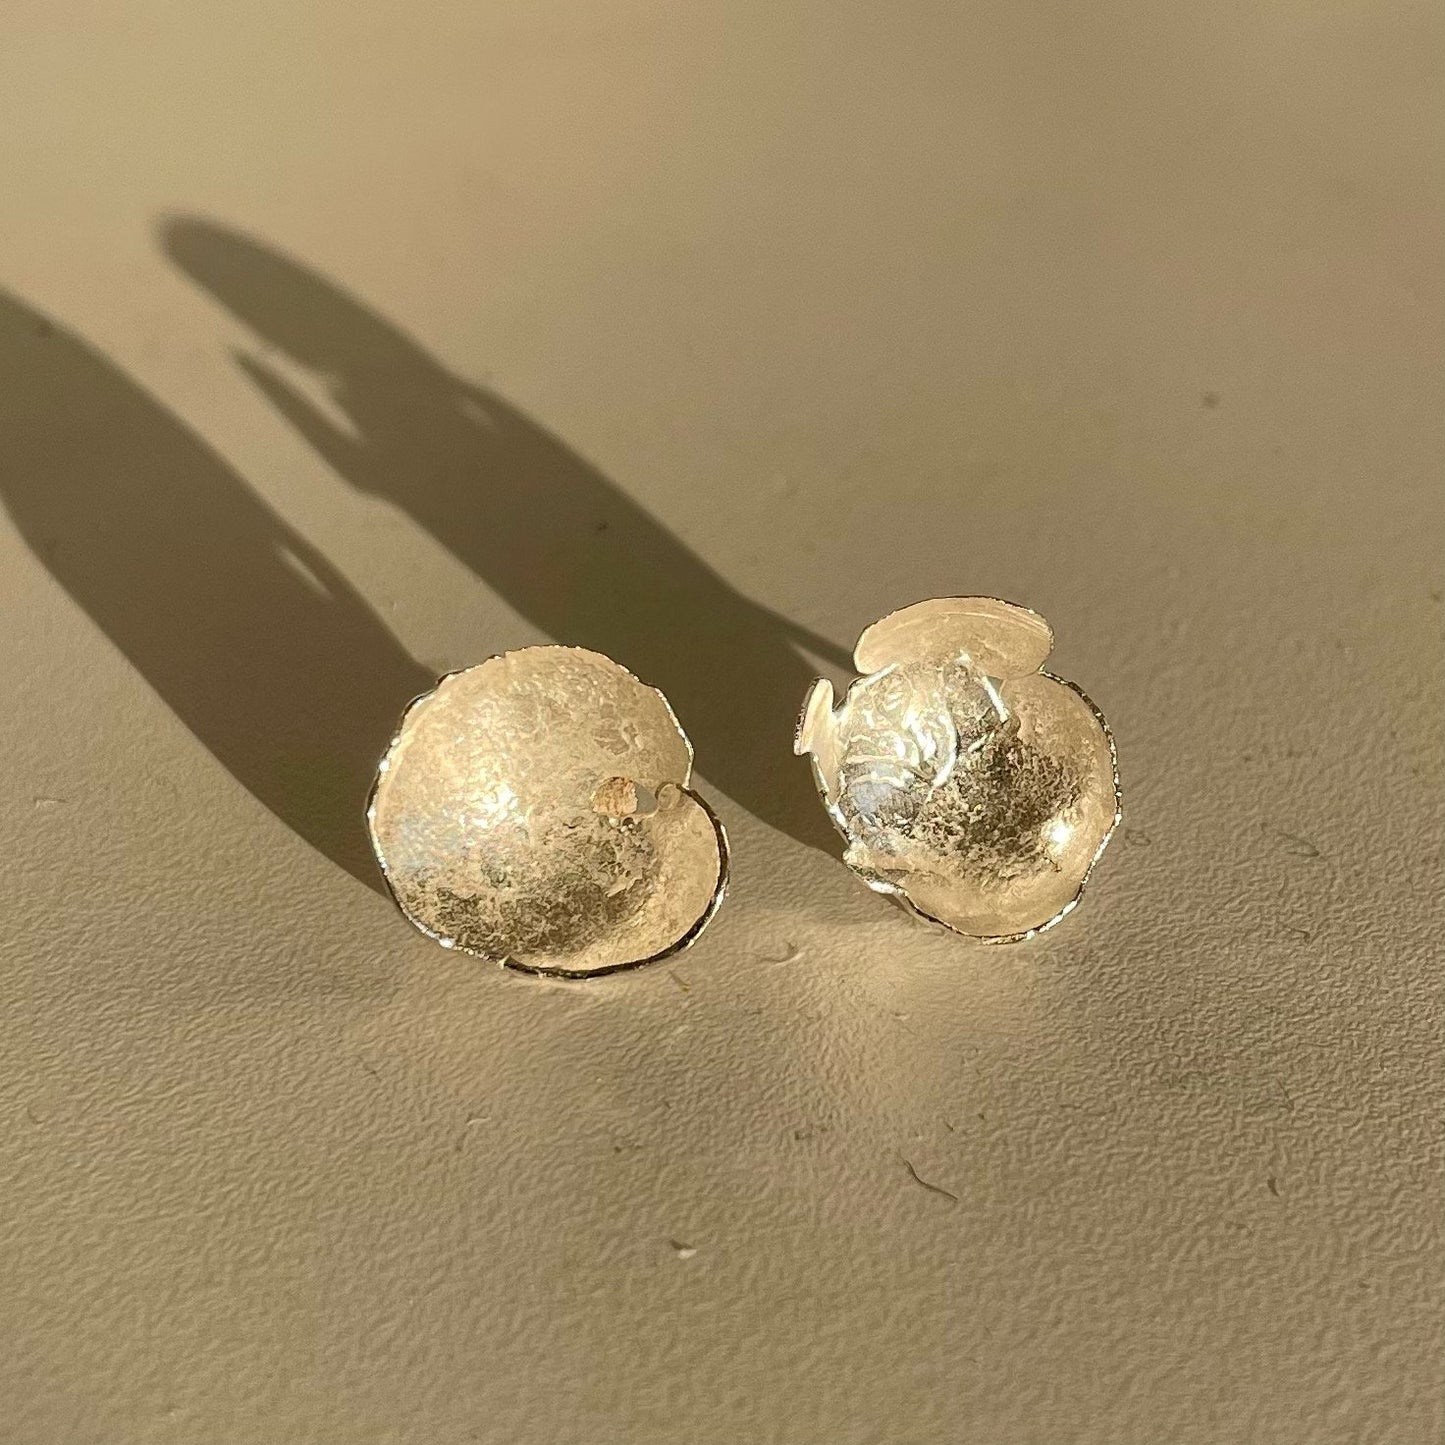 Ponds Studs: beautiful handmade organically shaped and domed recycled silver stud earrings.